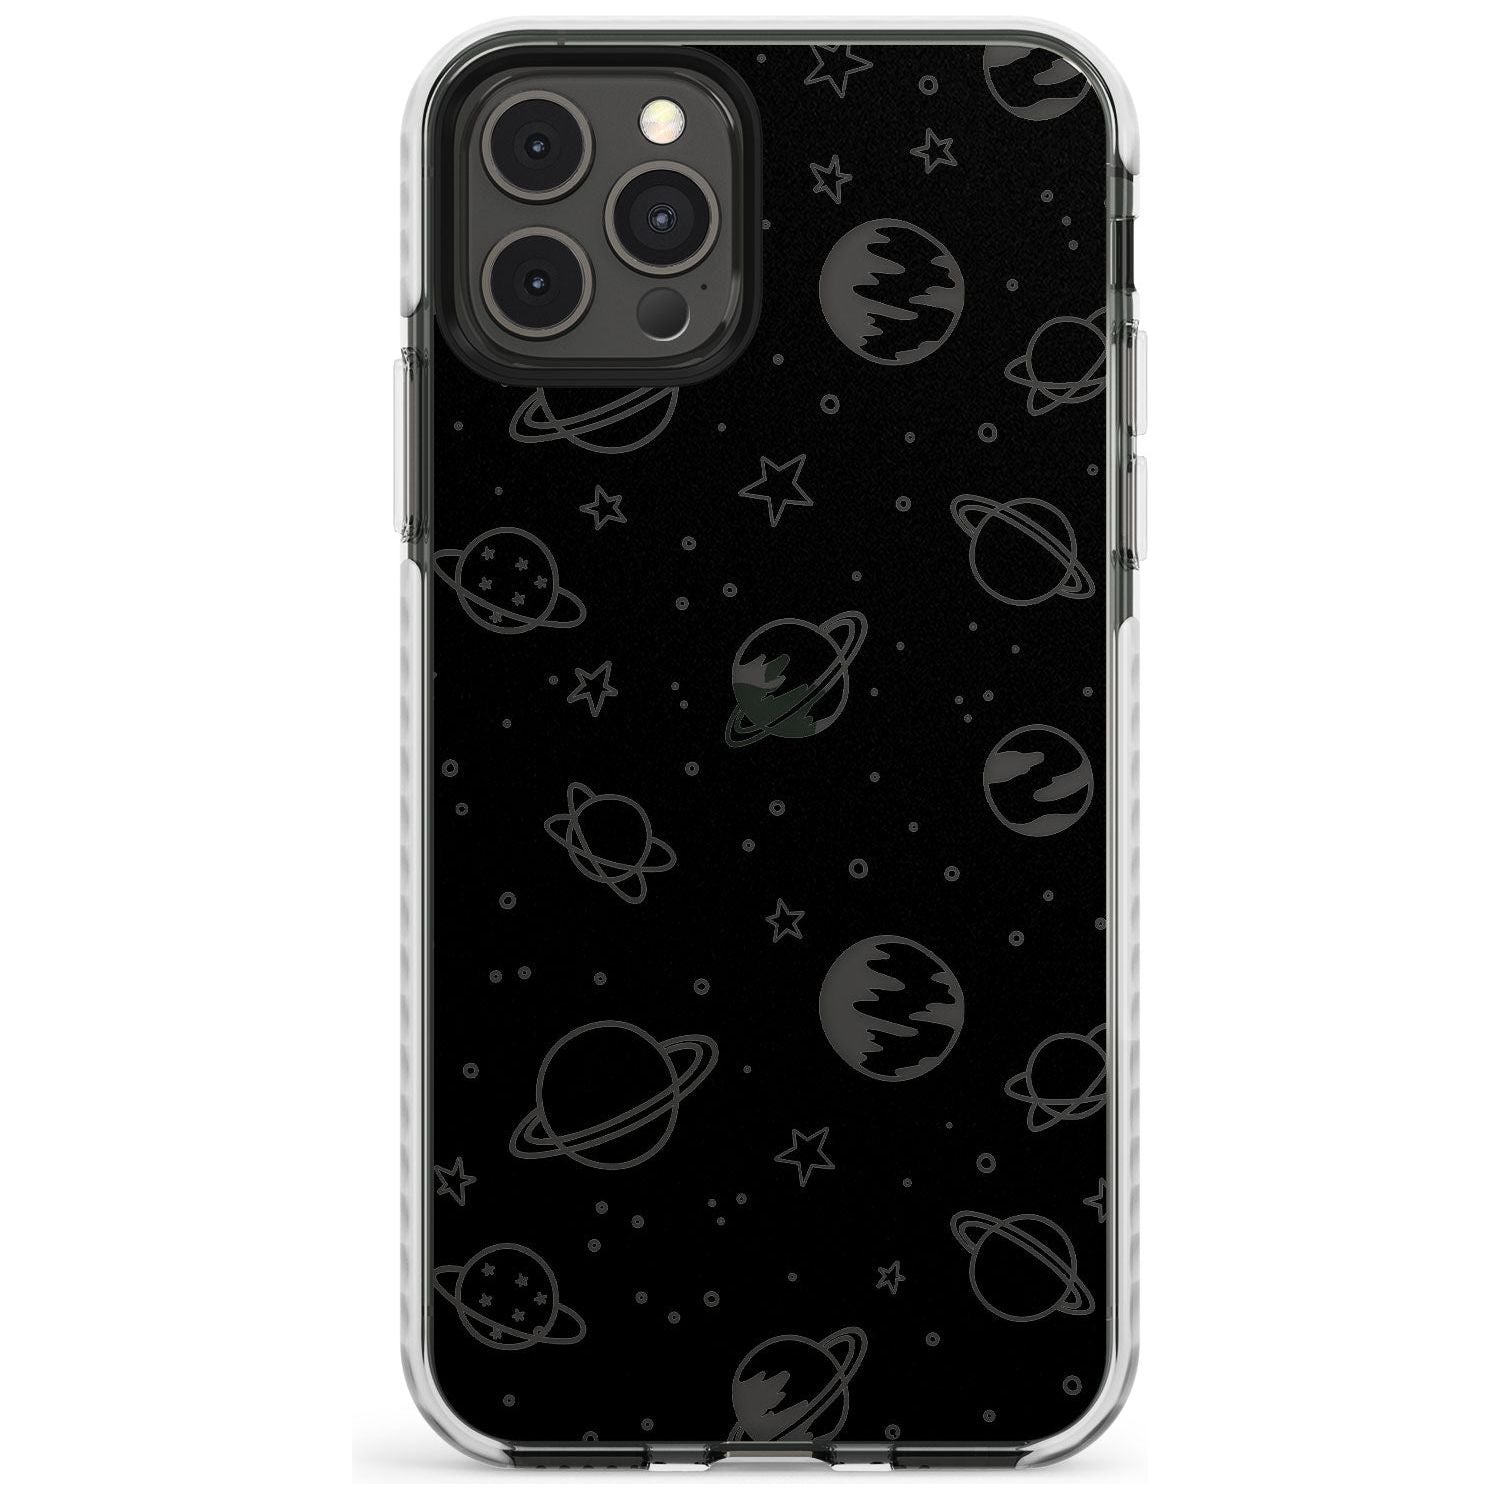 Outer Space Outlines: Clear on Black Slim TPU Phone Case for iPhone 11 Pro Max